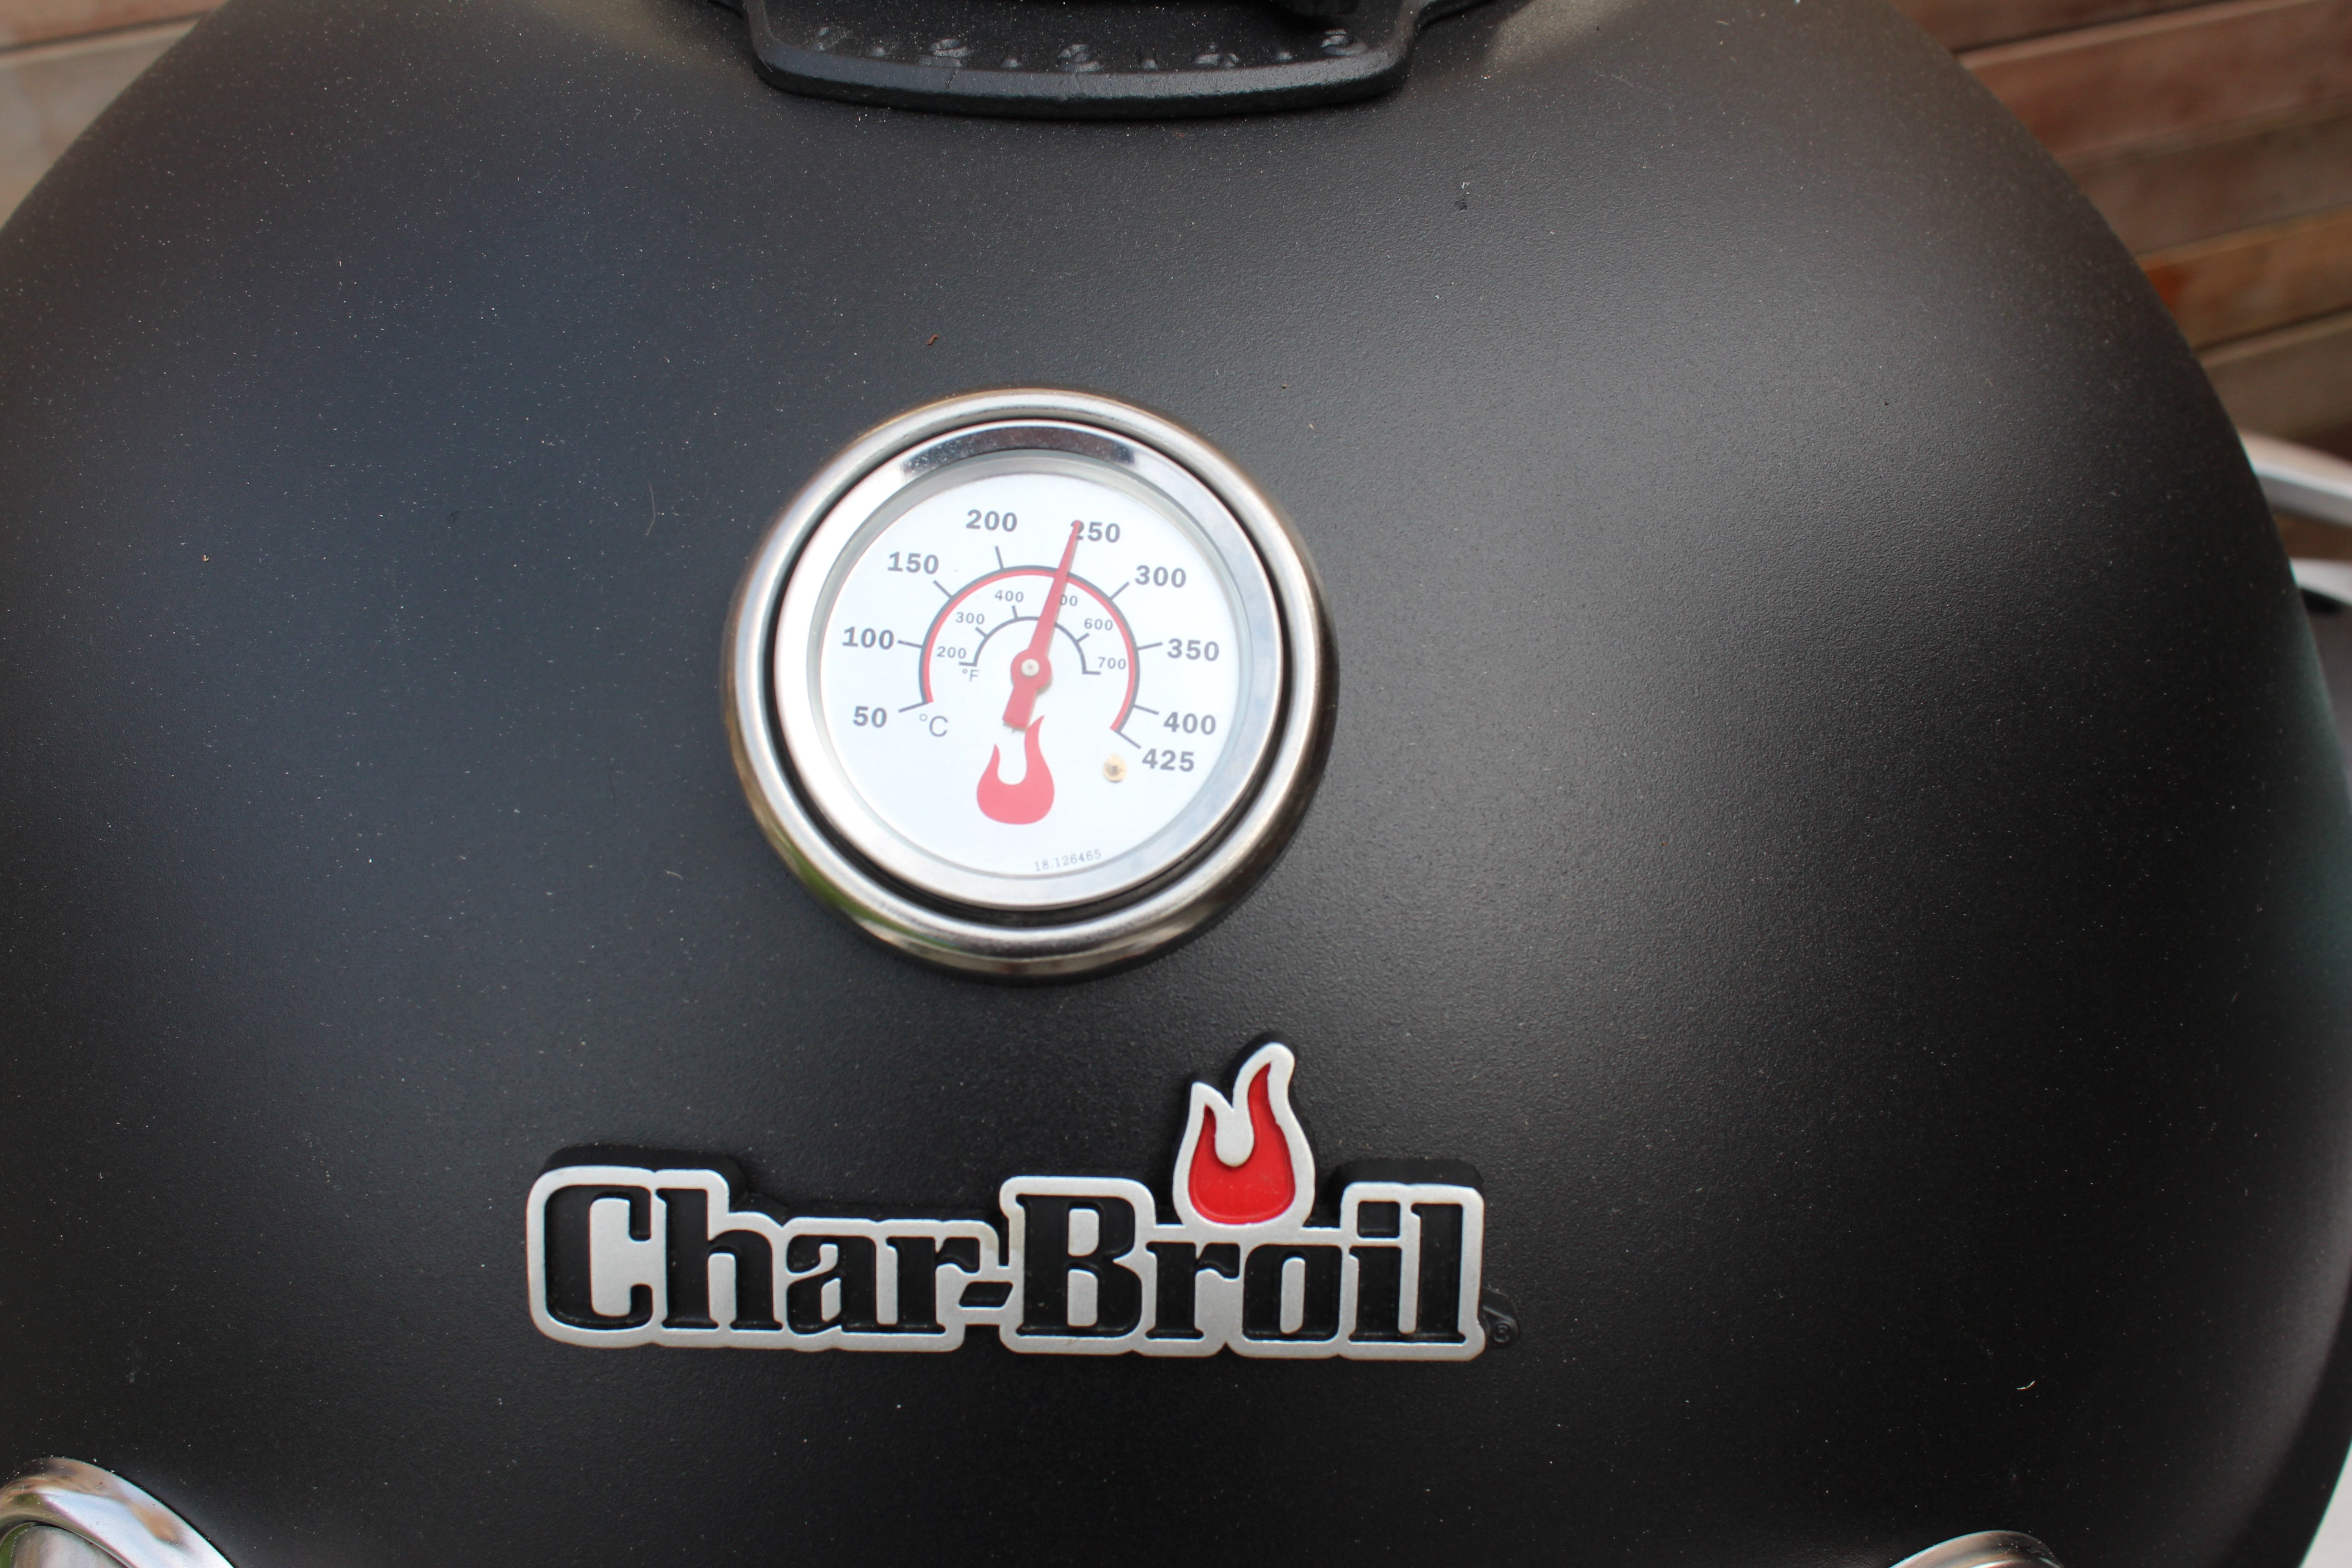 Char-Broil Kamander grill with temperature gauge.